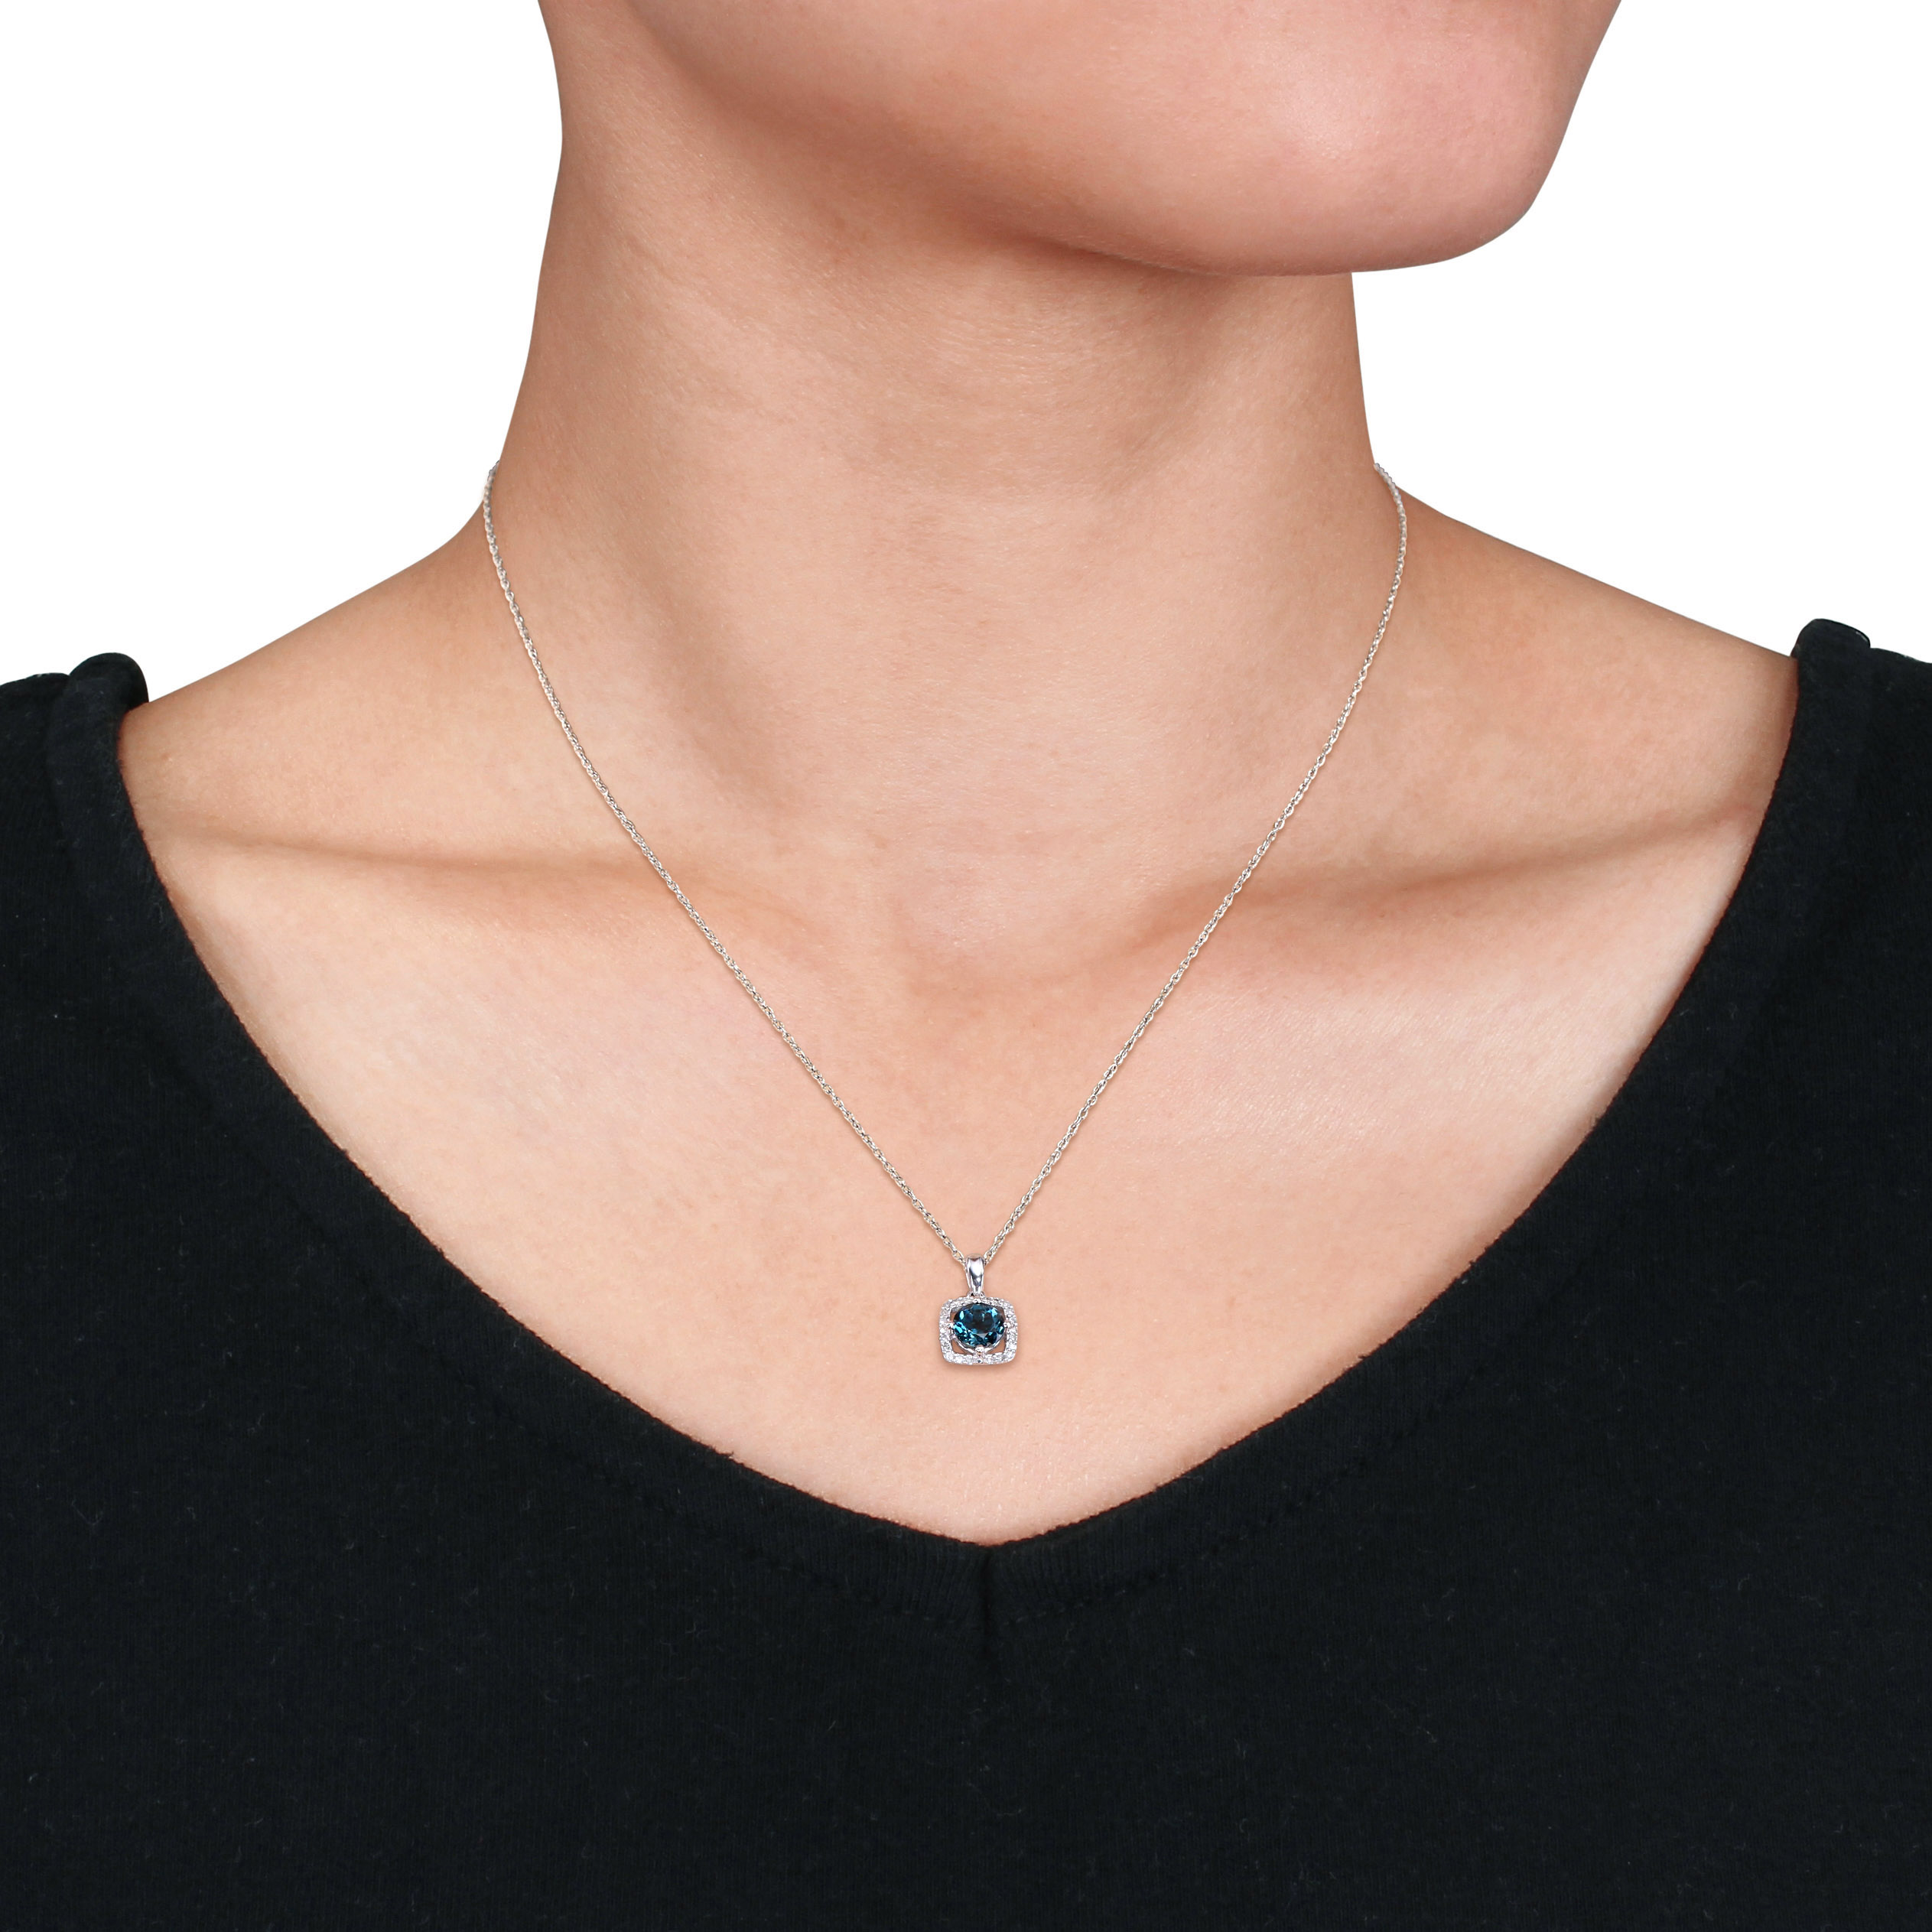 1 CT TGW London Blue Topaz and 1/10 CT TW Diamond Square Halo Pendant with Chain in 10k White Gold